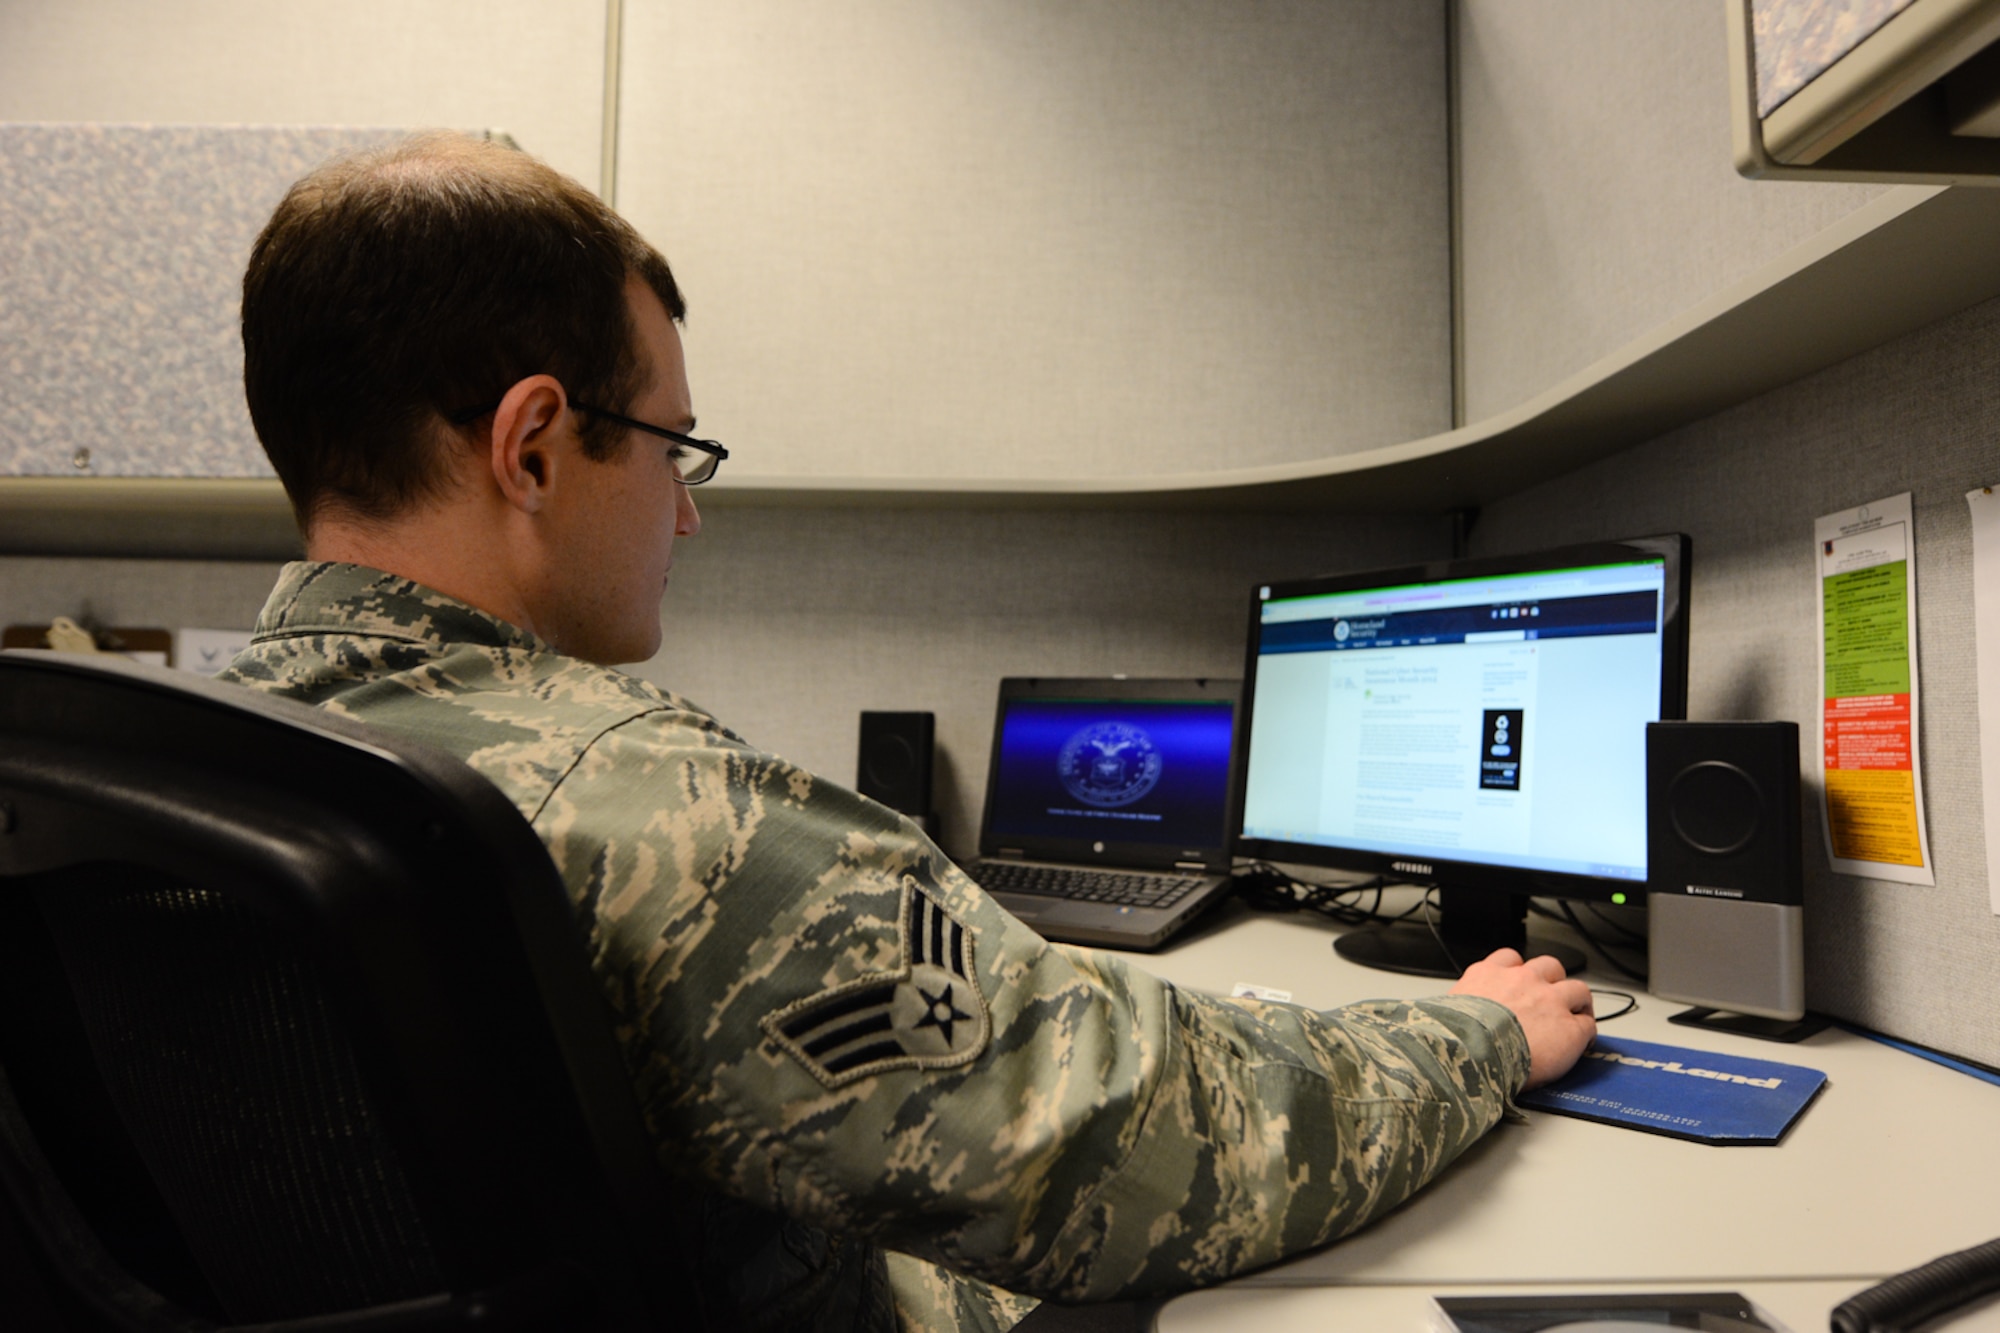 U.S. Air Force Senior Airman Charles Kitchen, an information security specialist assigned to the 139th Communications Flight, Missouri Air National Guard, conducts cyber operations at Rosecrans Air National Guard Base, Oct. 8, 2014. October is National Cybersecurity Awareness Month. (U.S. Air National Guard photo by Tech. Sgt. Michael Crane/Released)